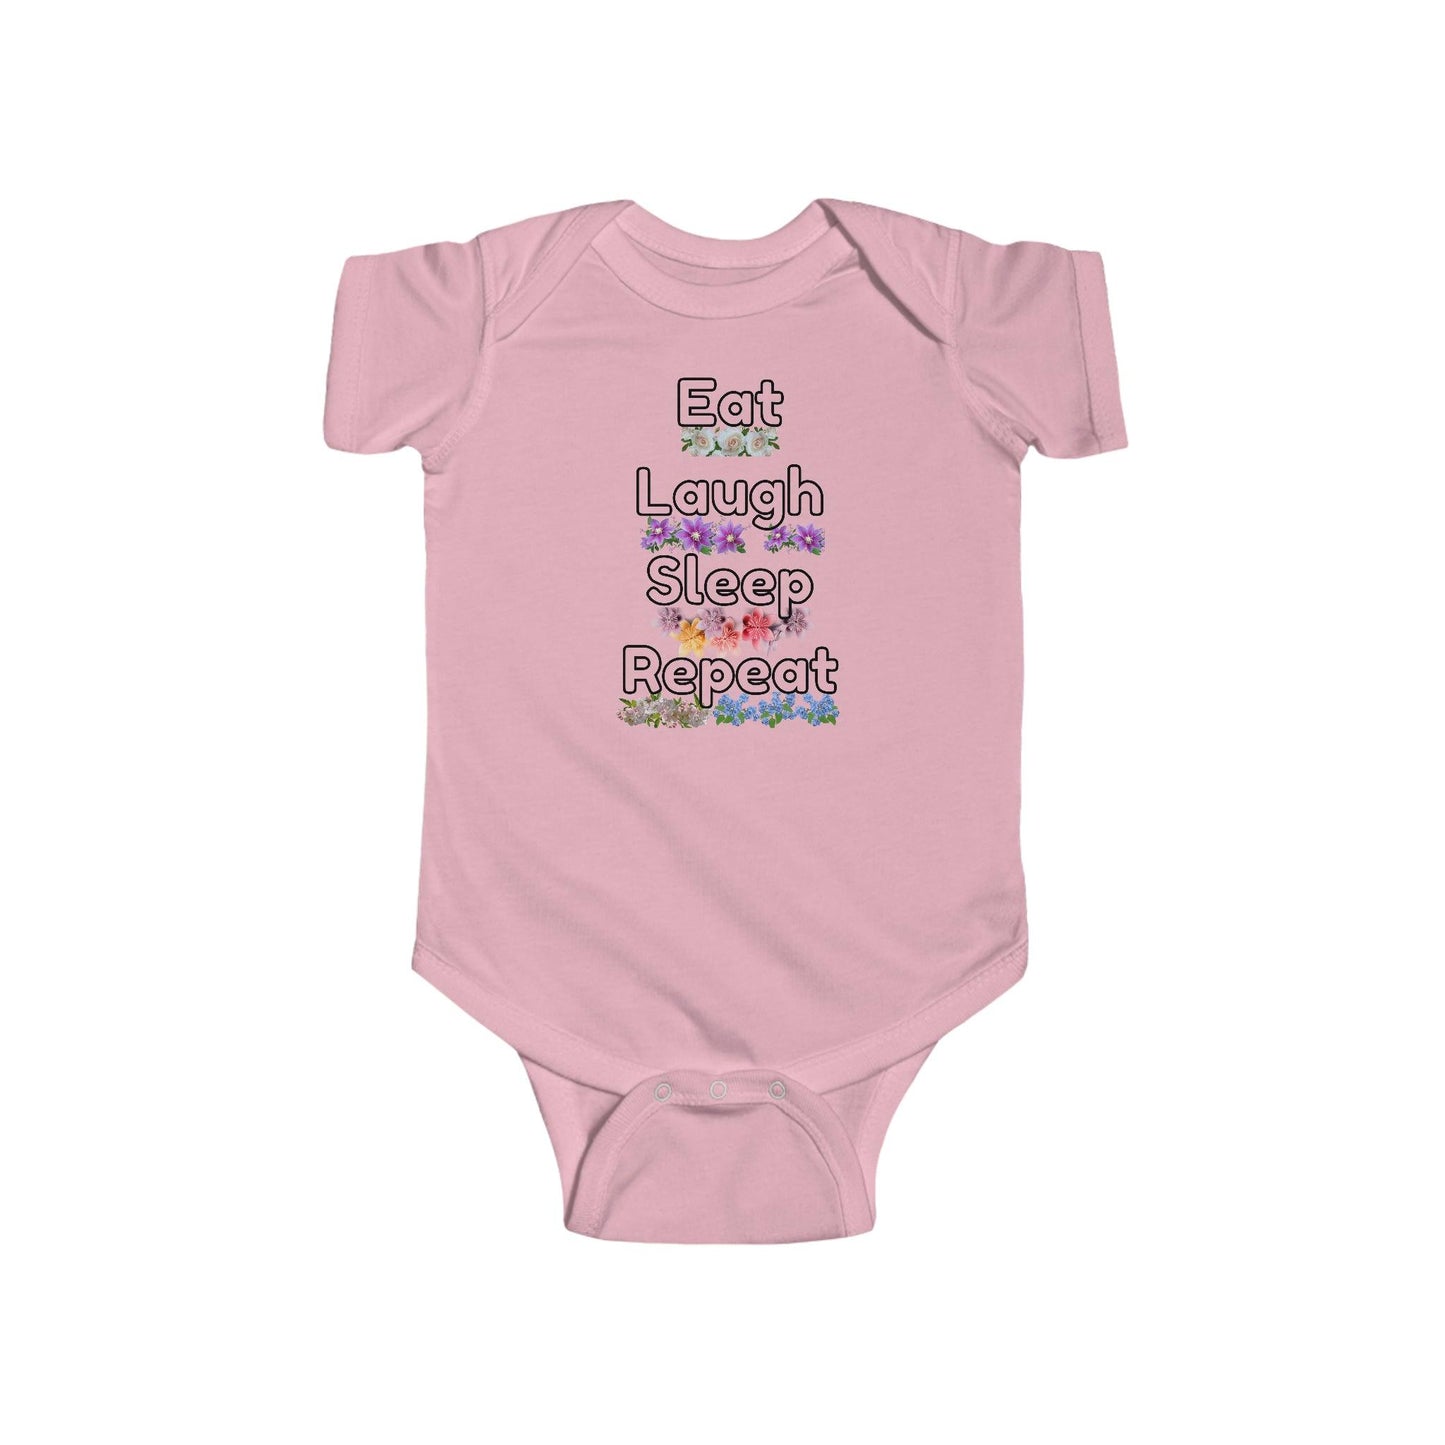 Baby Onesies - Baby gifts - Bodysuit - Baby clothes - Eat laugh sleep repeat